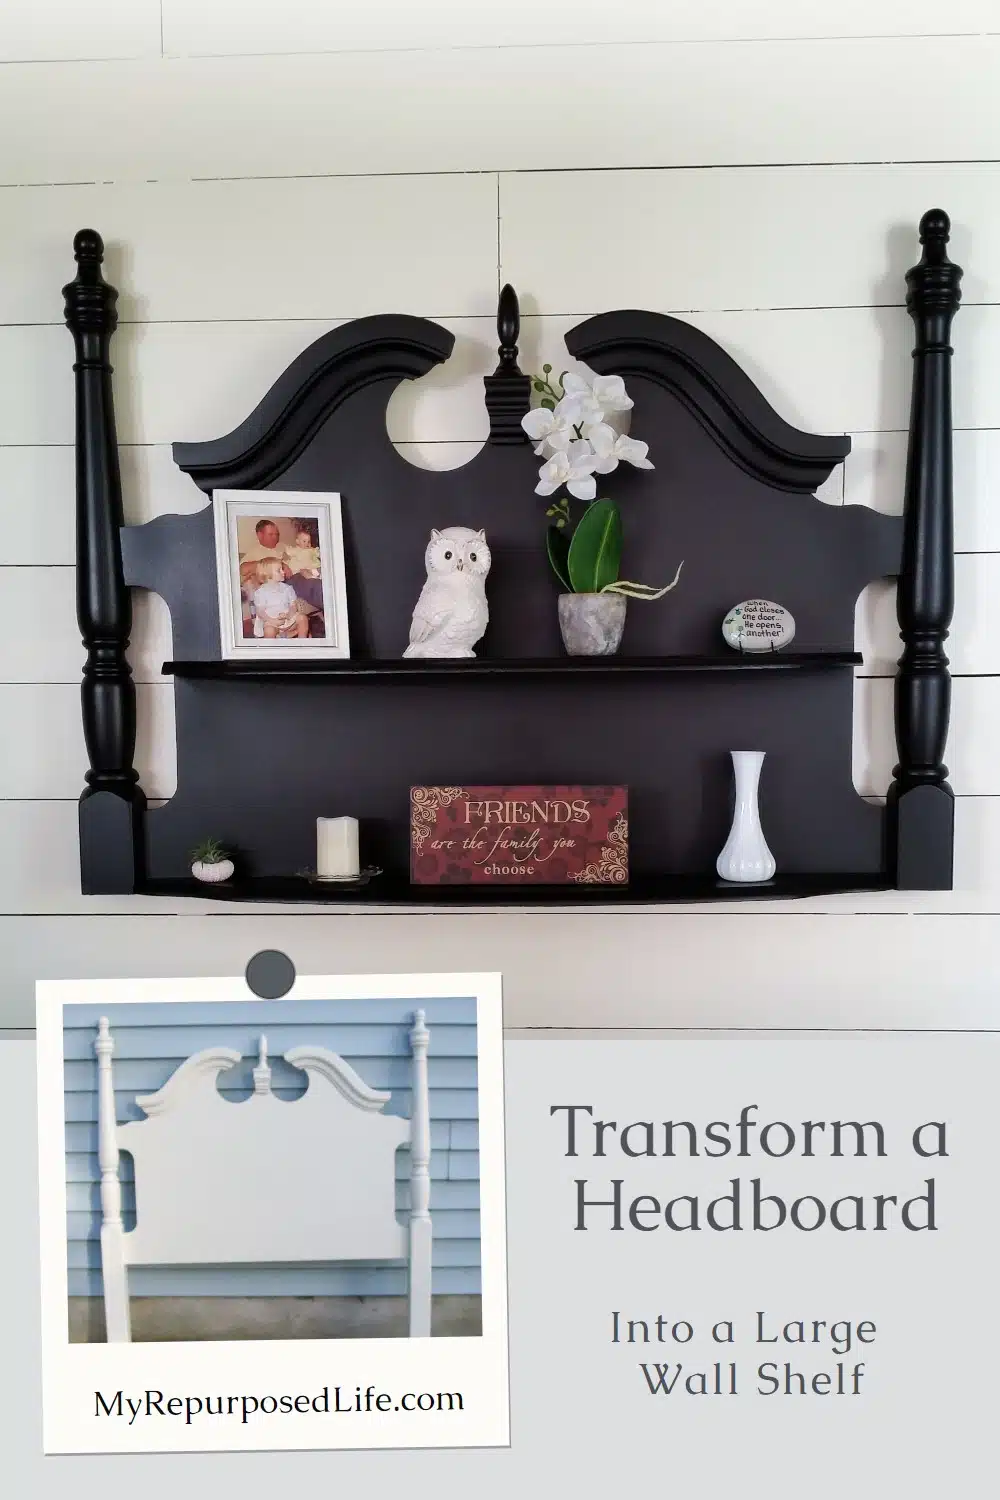 How to make a large shelf out of an old headboard. So popular on the blog! Step by step directions. #MyRepurposedLife #repurposed #furniture #shelf via @repurposedlife